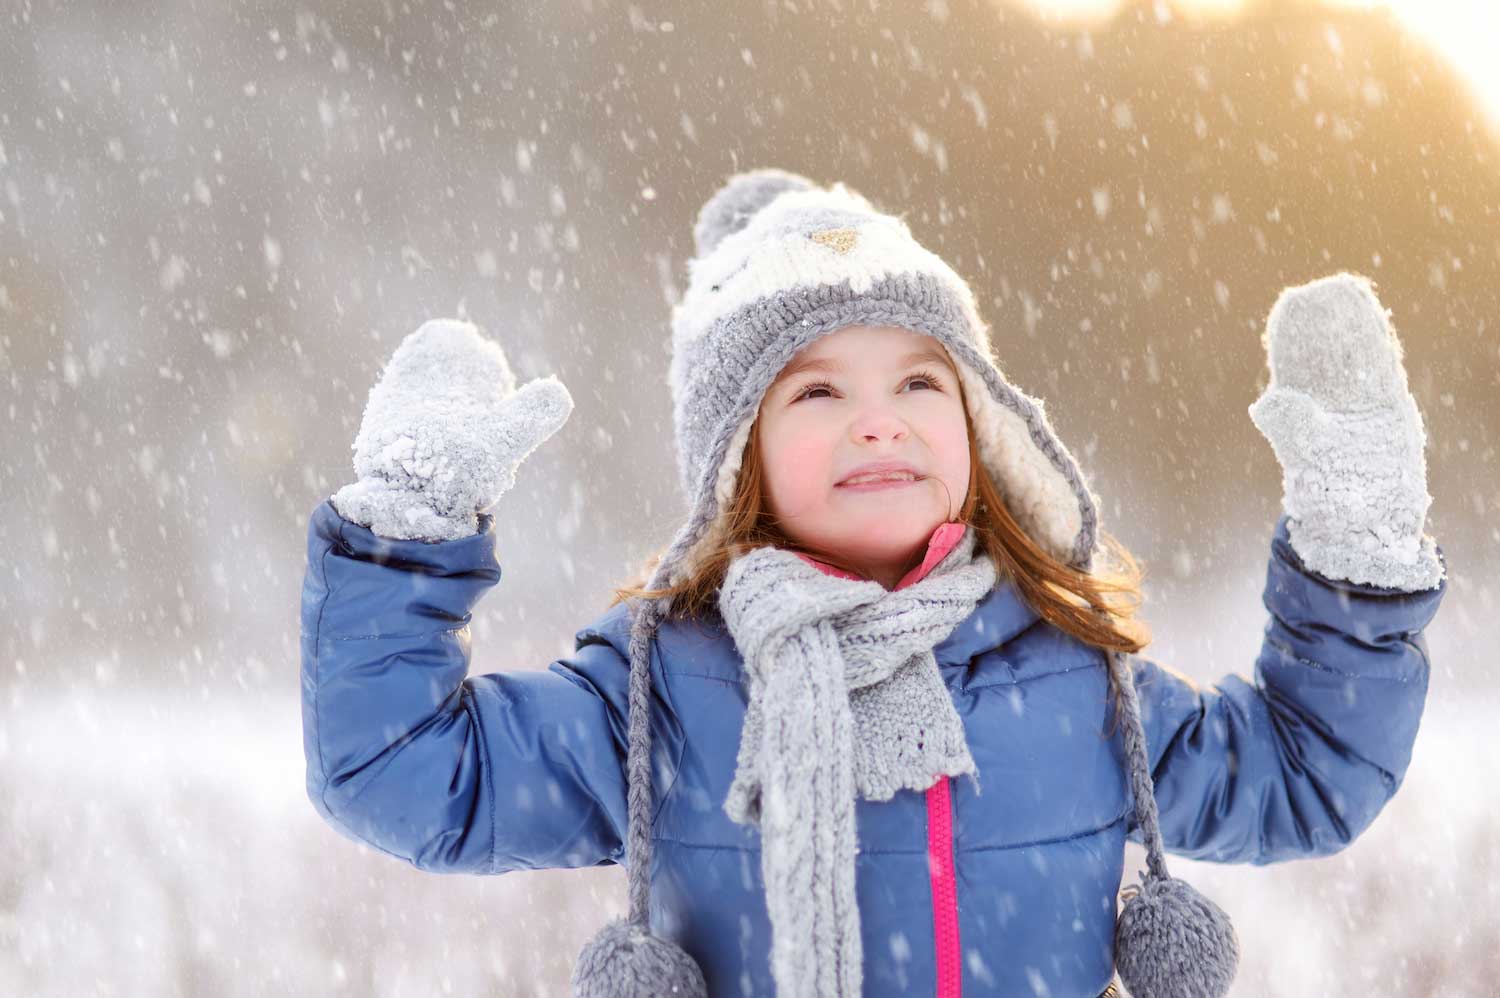 A child dressed for winter looking up at snow falling.